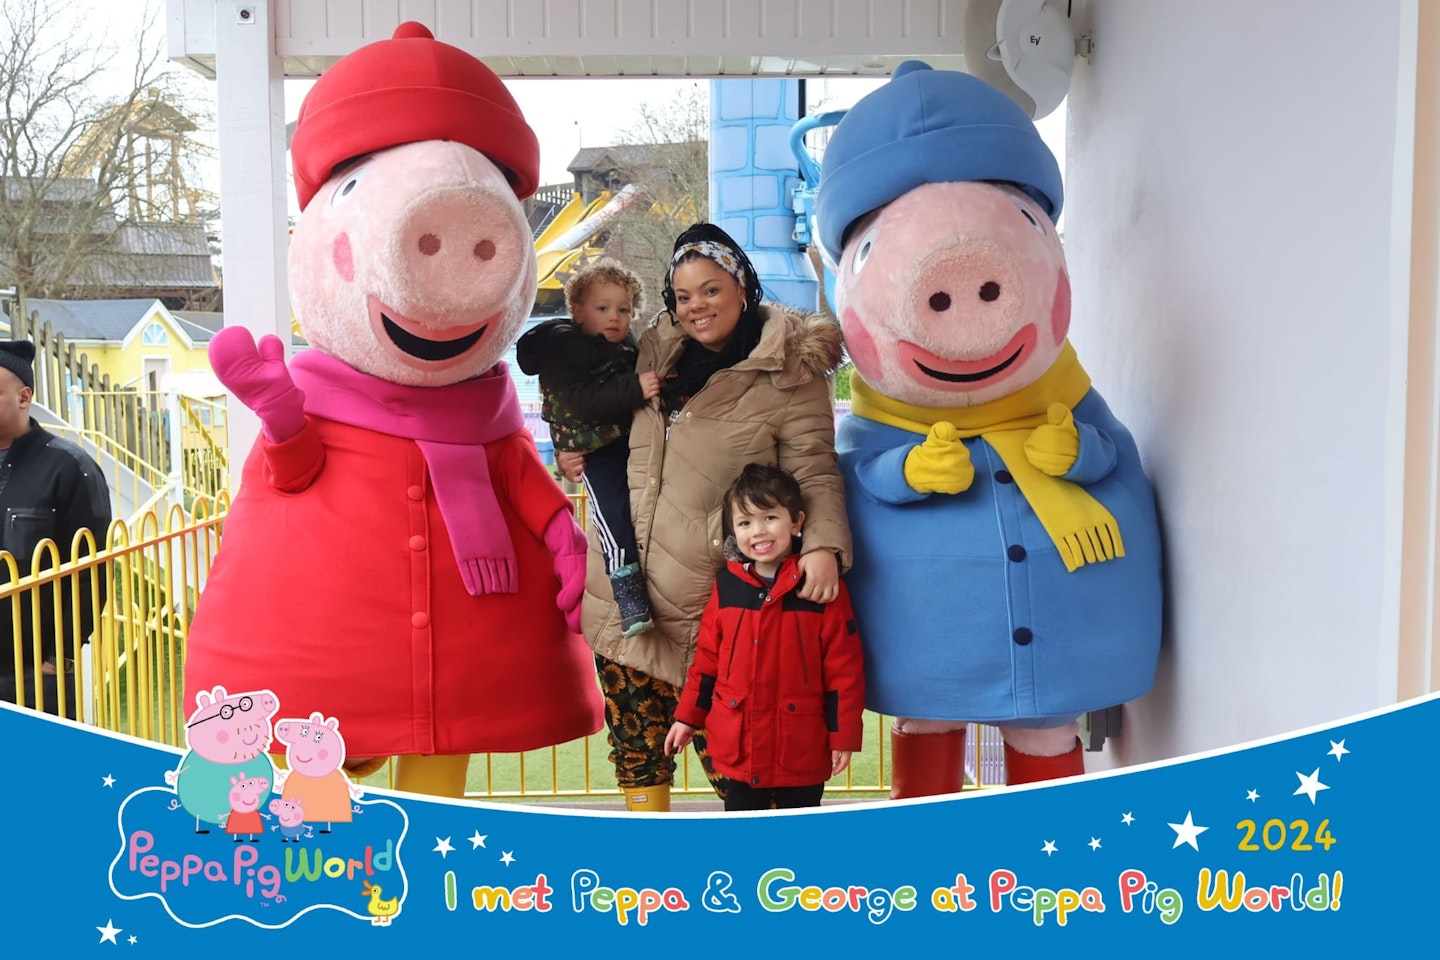 Peppa Pig World Review